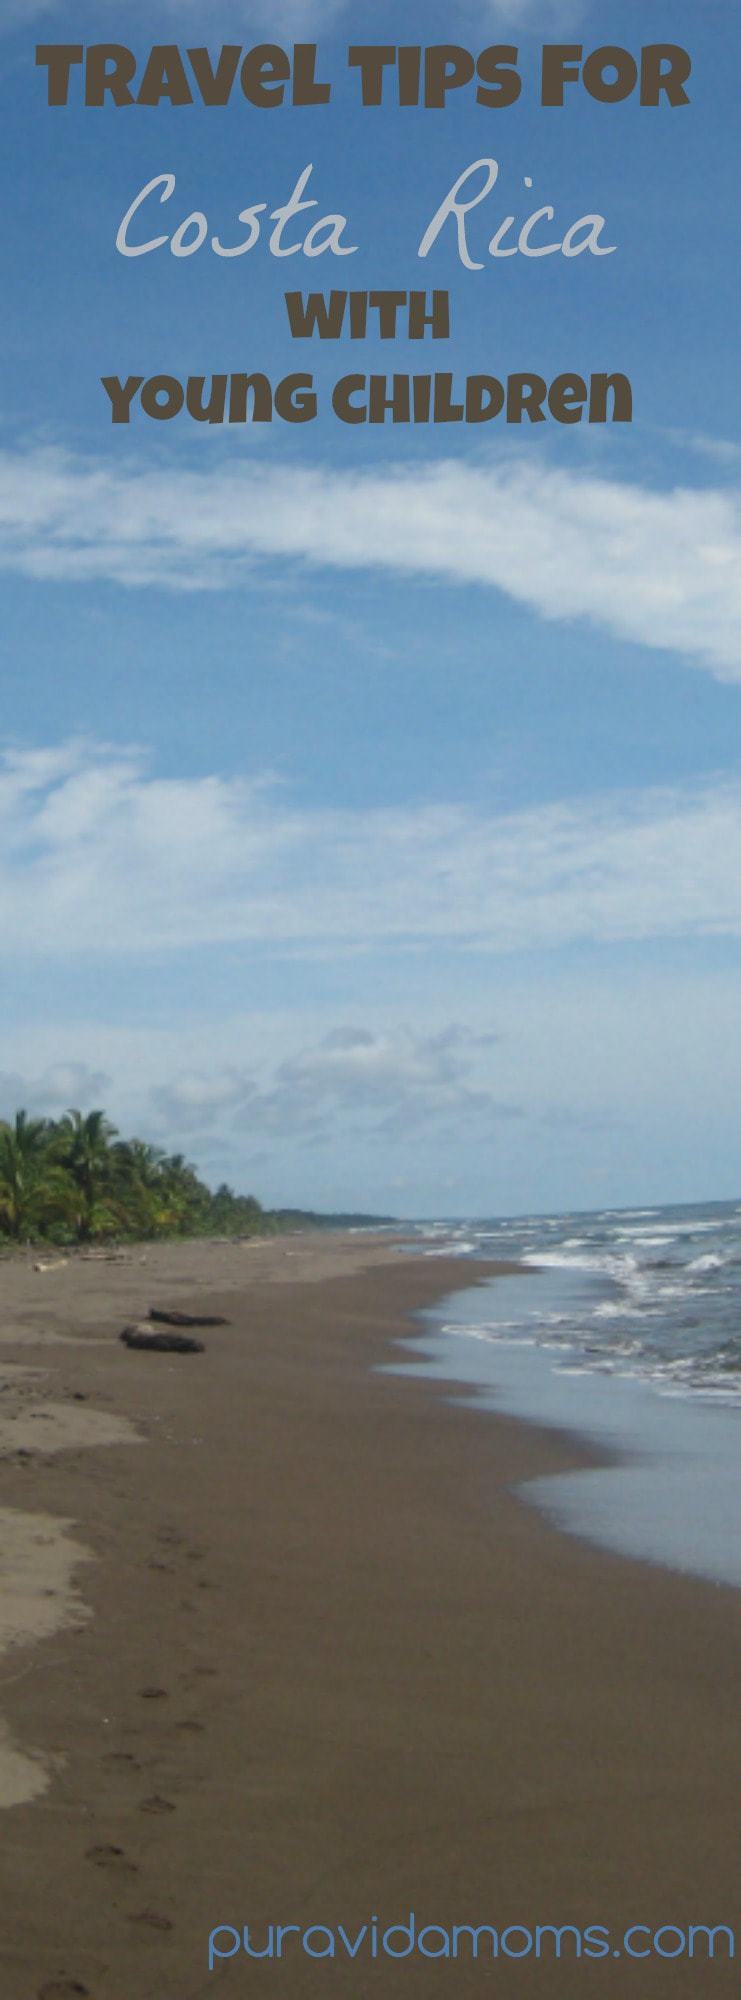 5 Travel Tips For Visiting Costa Rica With Young Children